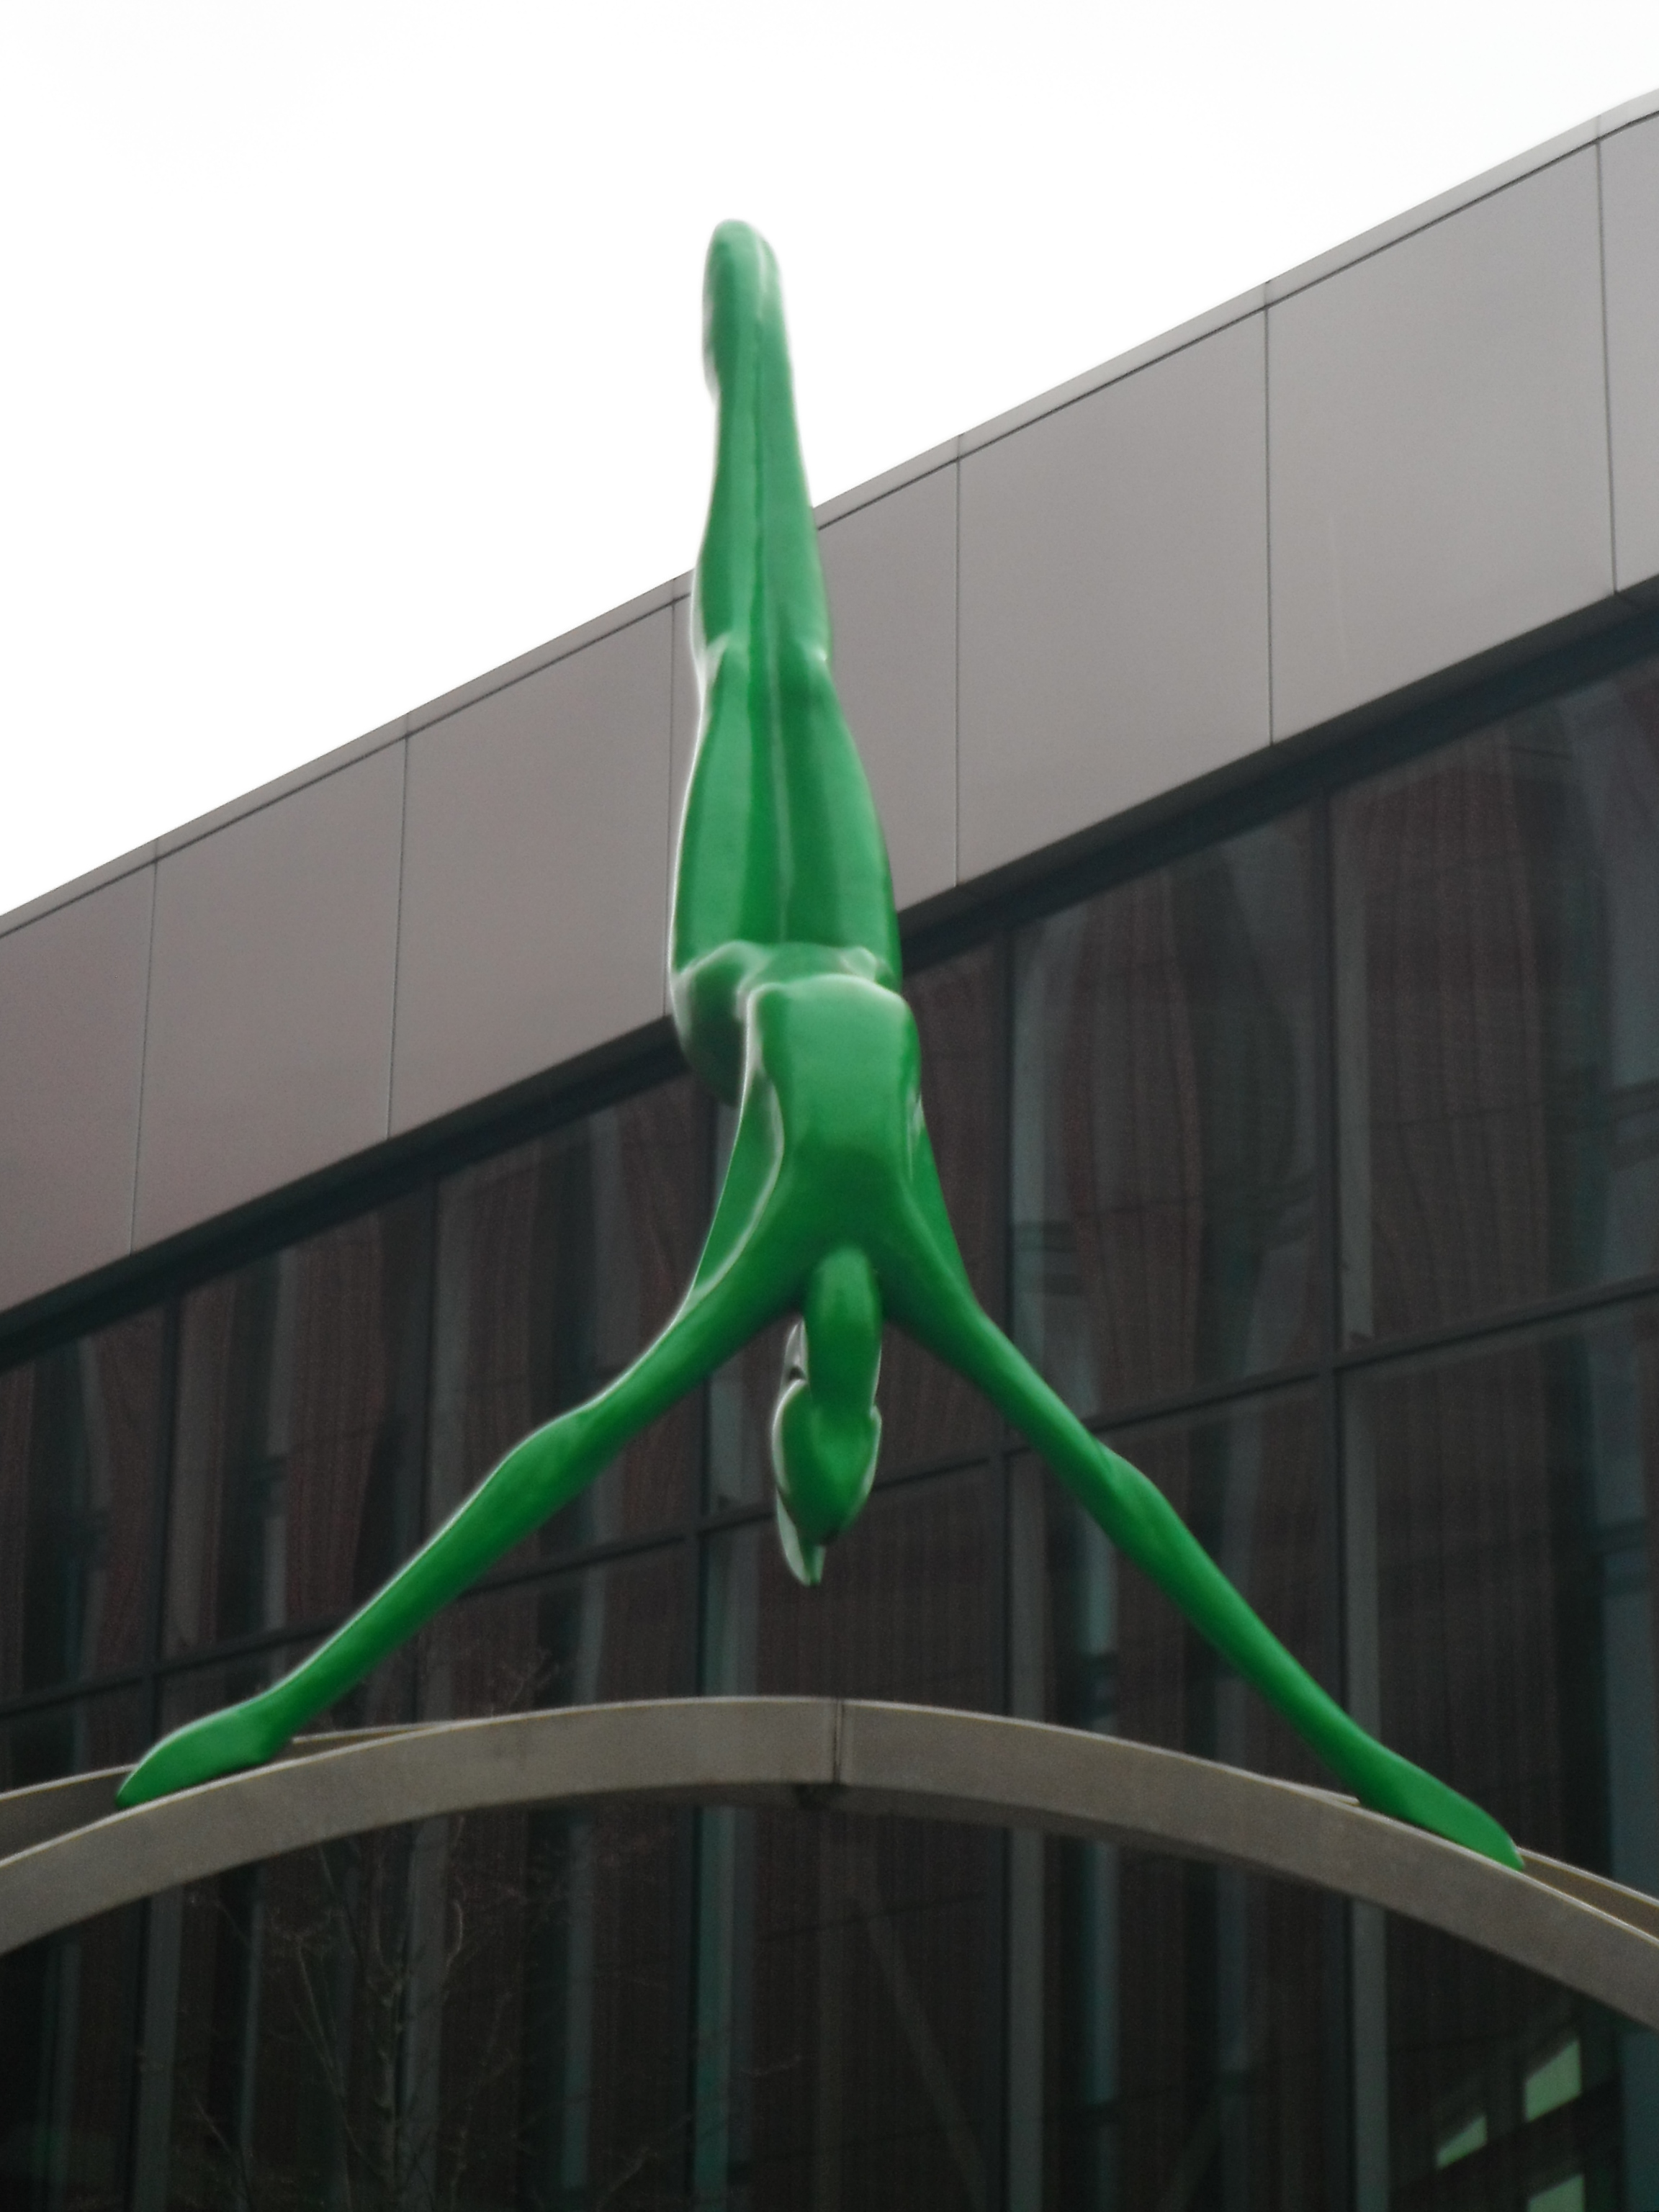 Photo taken by me – The statue of a Gymnast in Manchester city centre. 